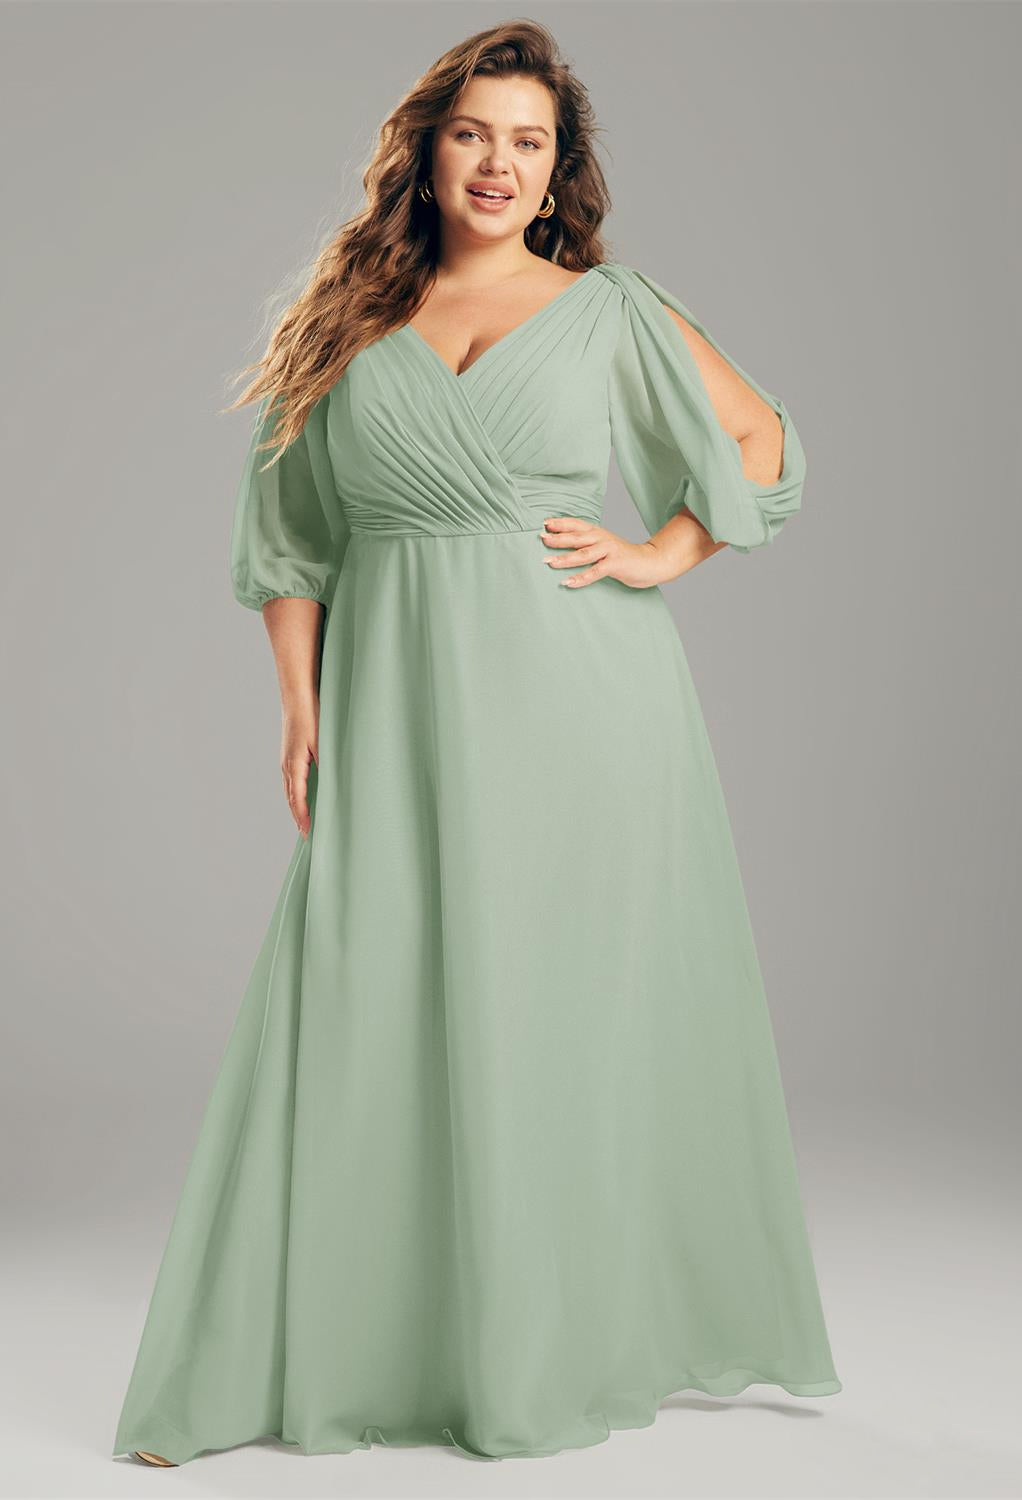 A woman in an elegant sage green Polly - Chiffon Bridesmaid Dress from Bergamot Bridal poses confidently against a gray background.